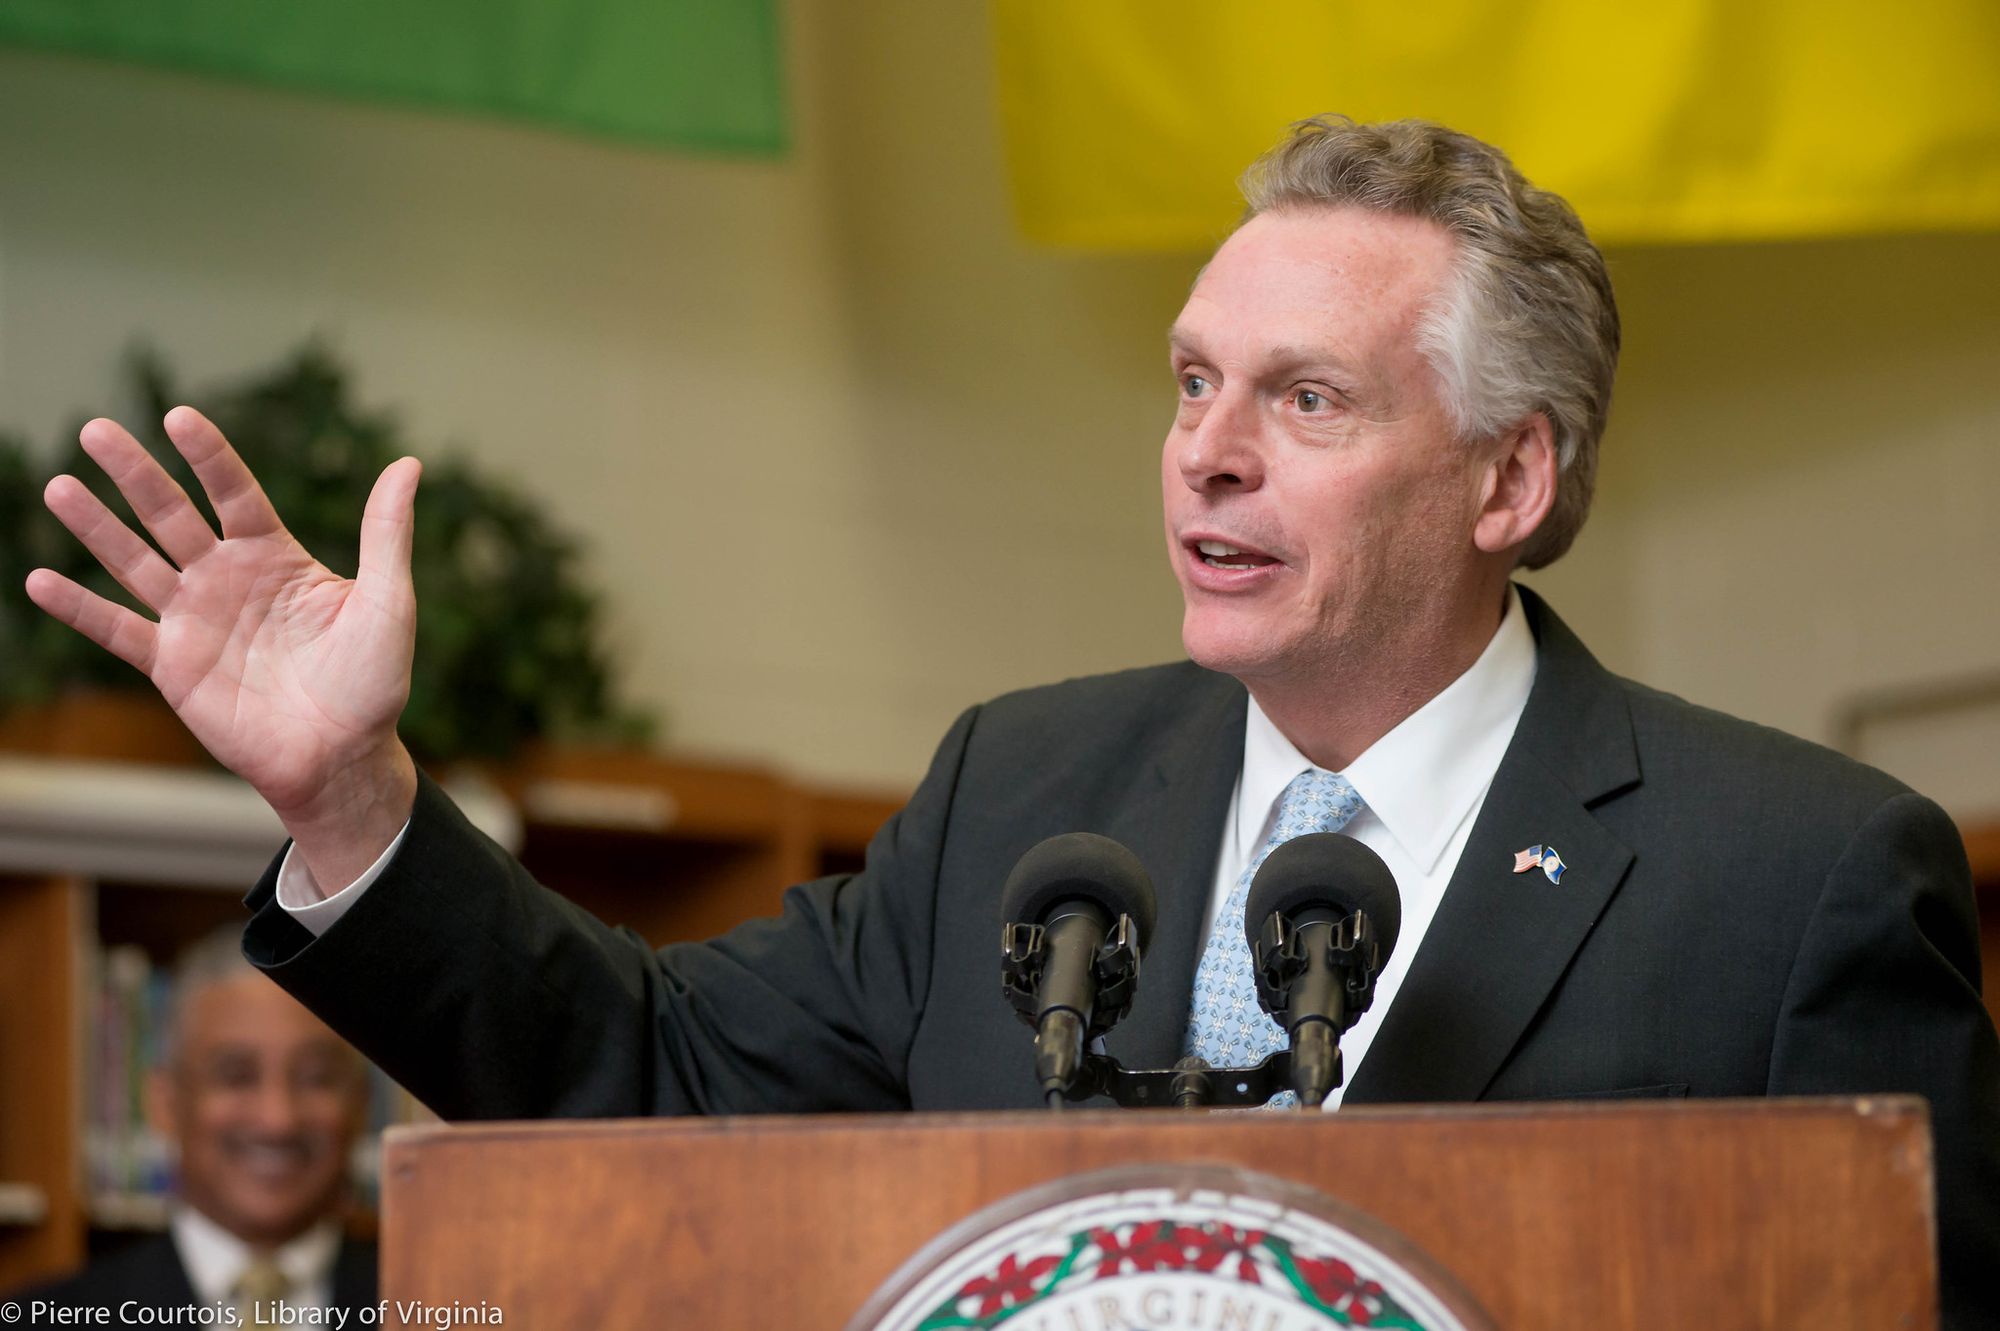 Democratic candidate and former Virginia governor Terry McAuliffe. 